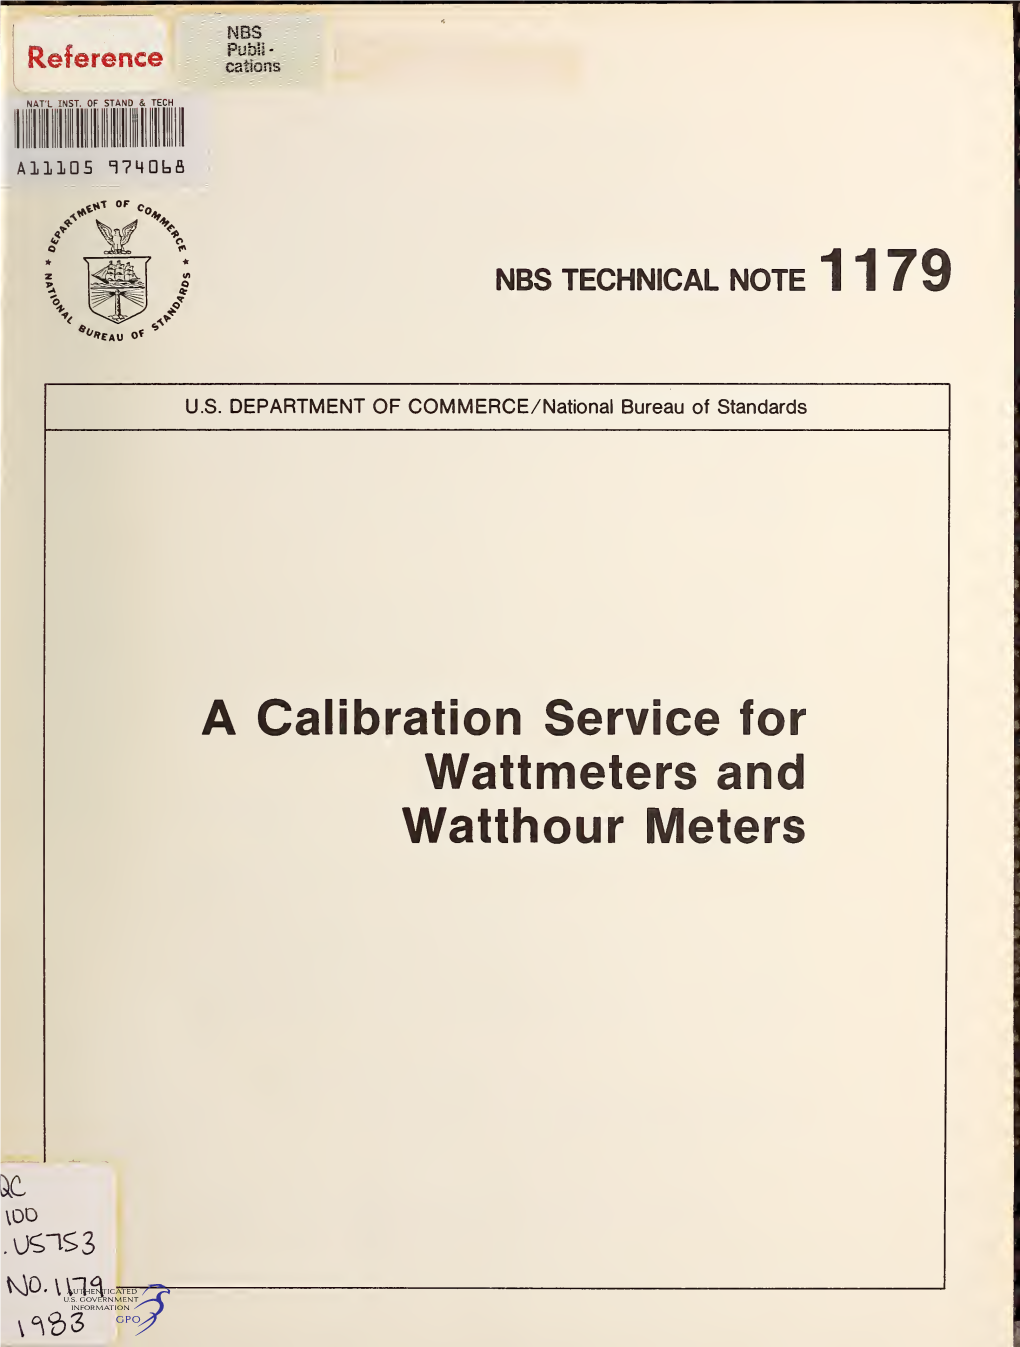 A Calibration Service for Wattmeters and Watthour Meters